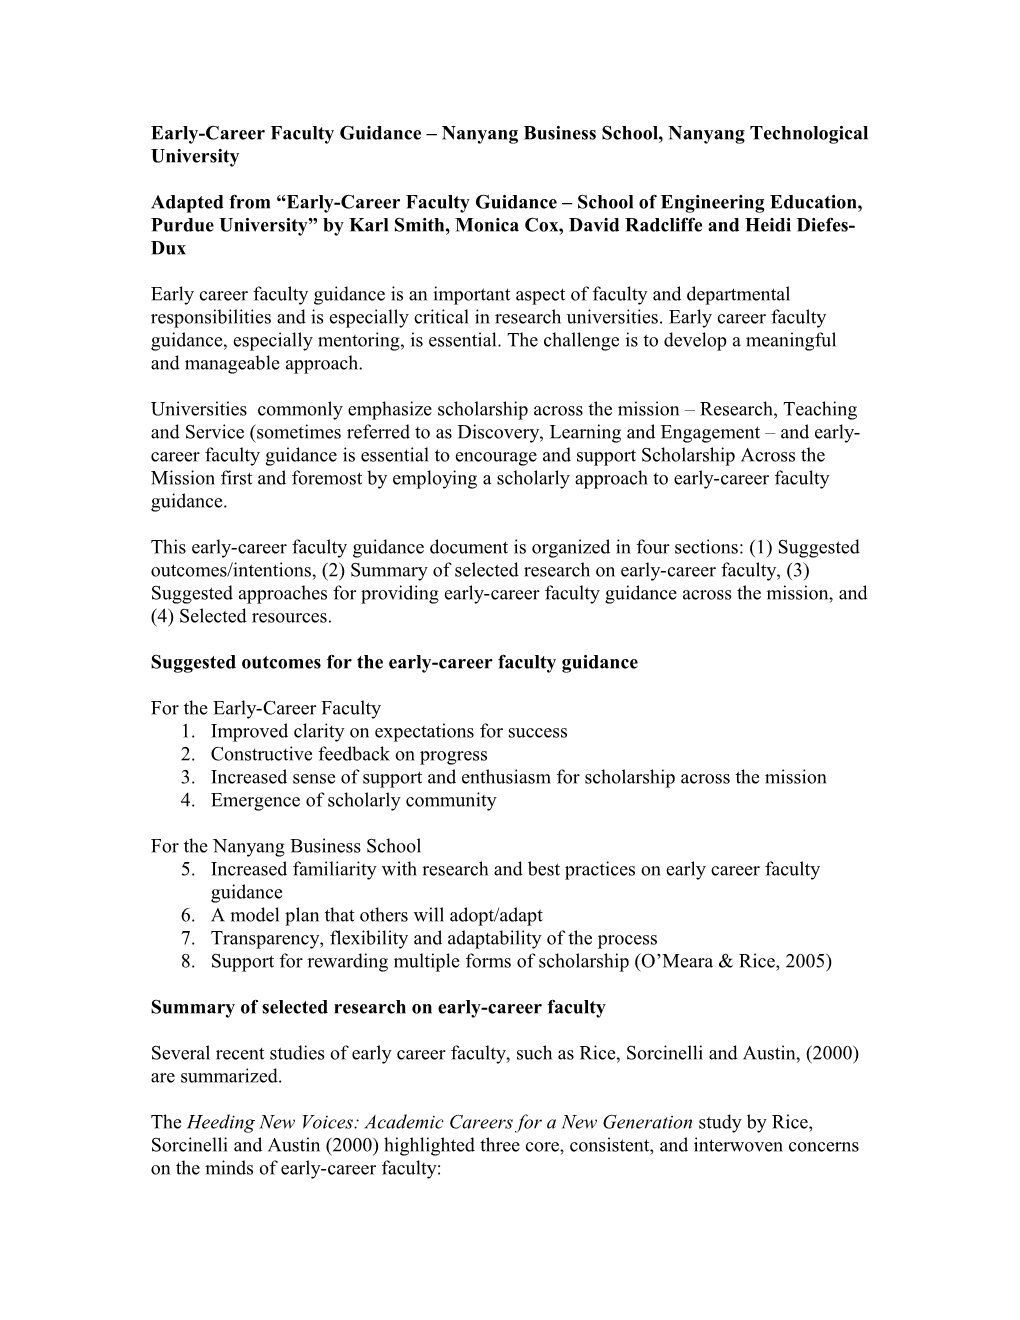 School of Engineering Education Early Career Faculty Guidance Proposal